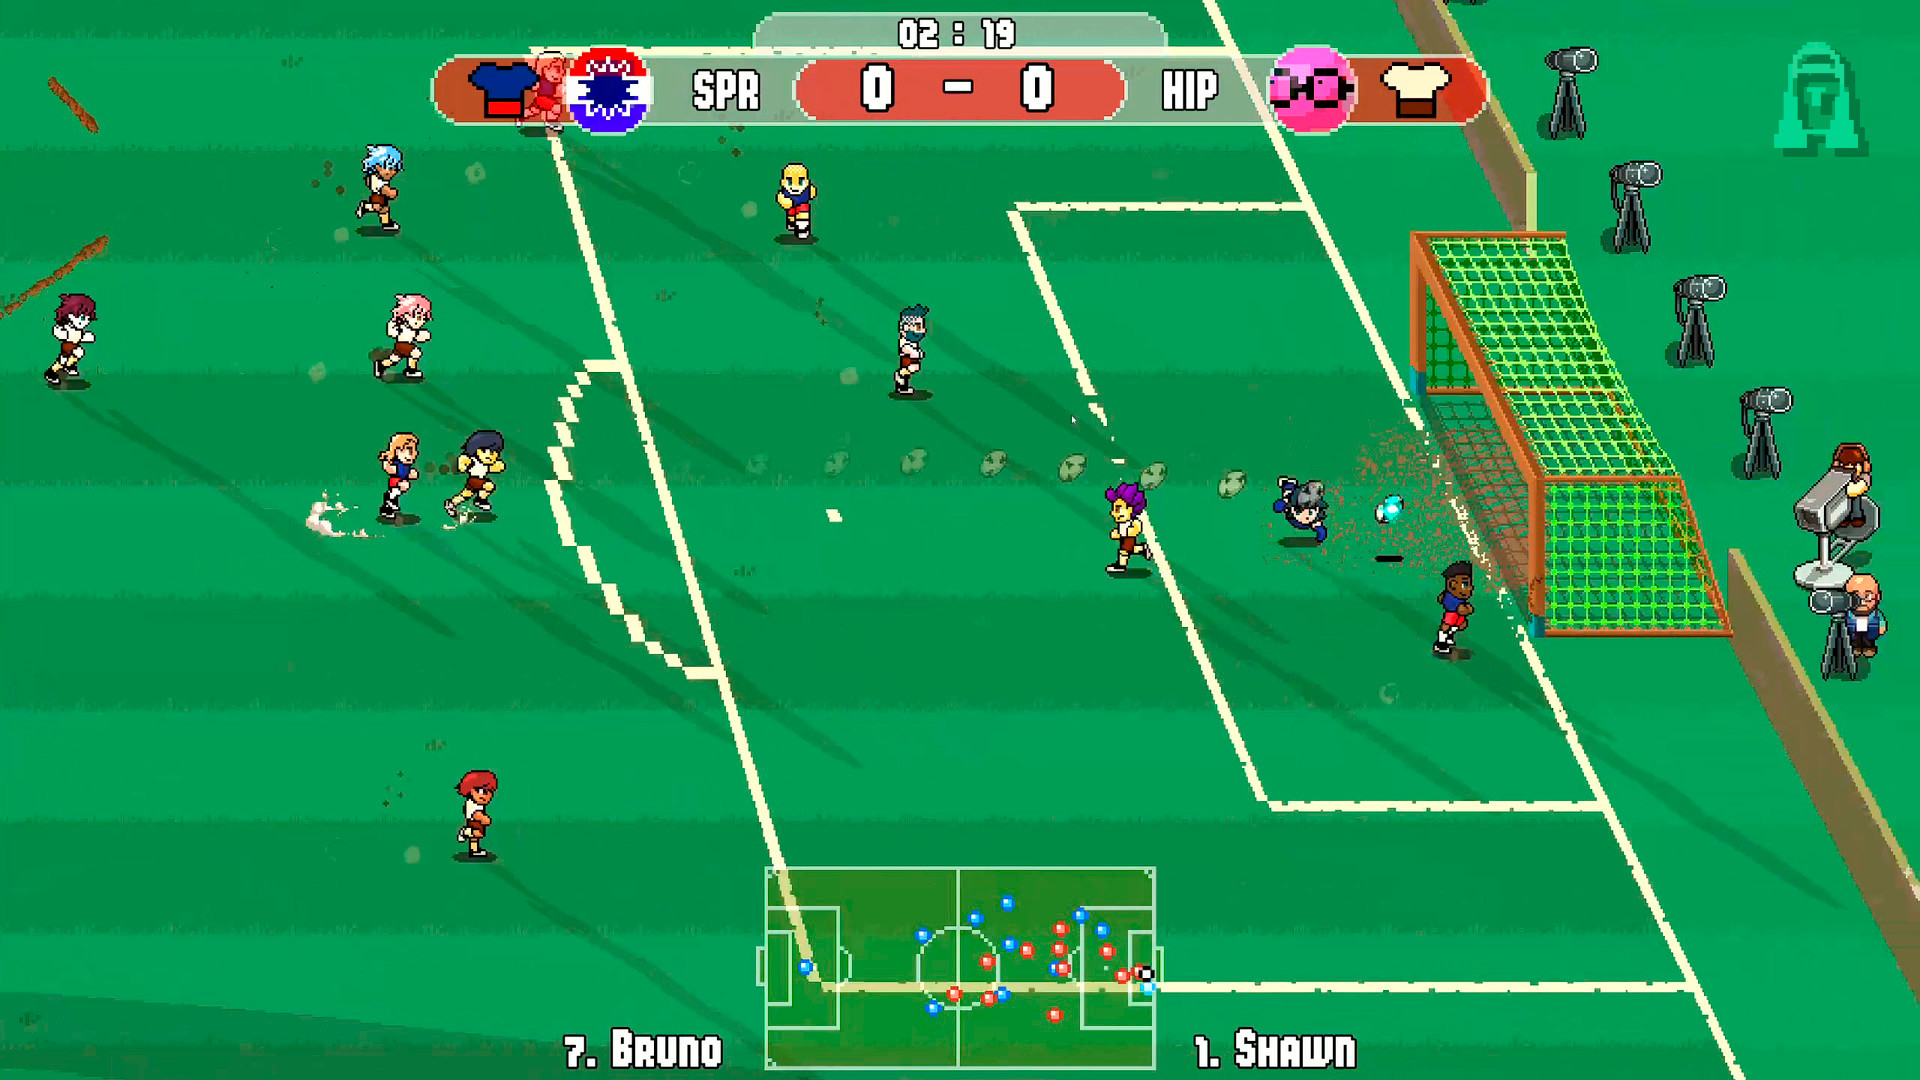 Pixel Cup Soccer Ultimate Edition Free Download